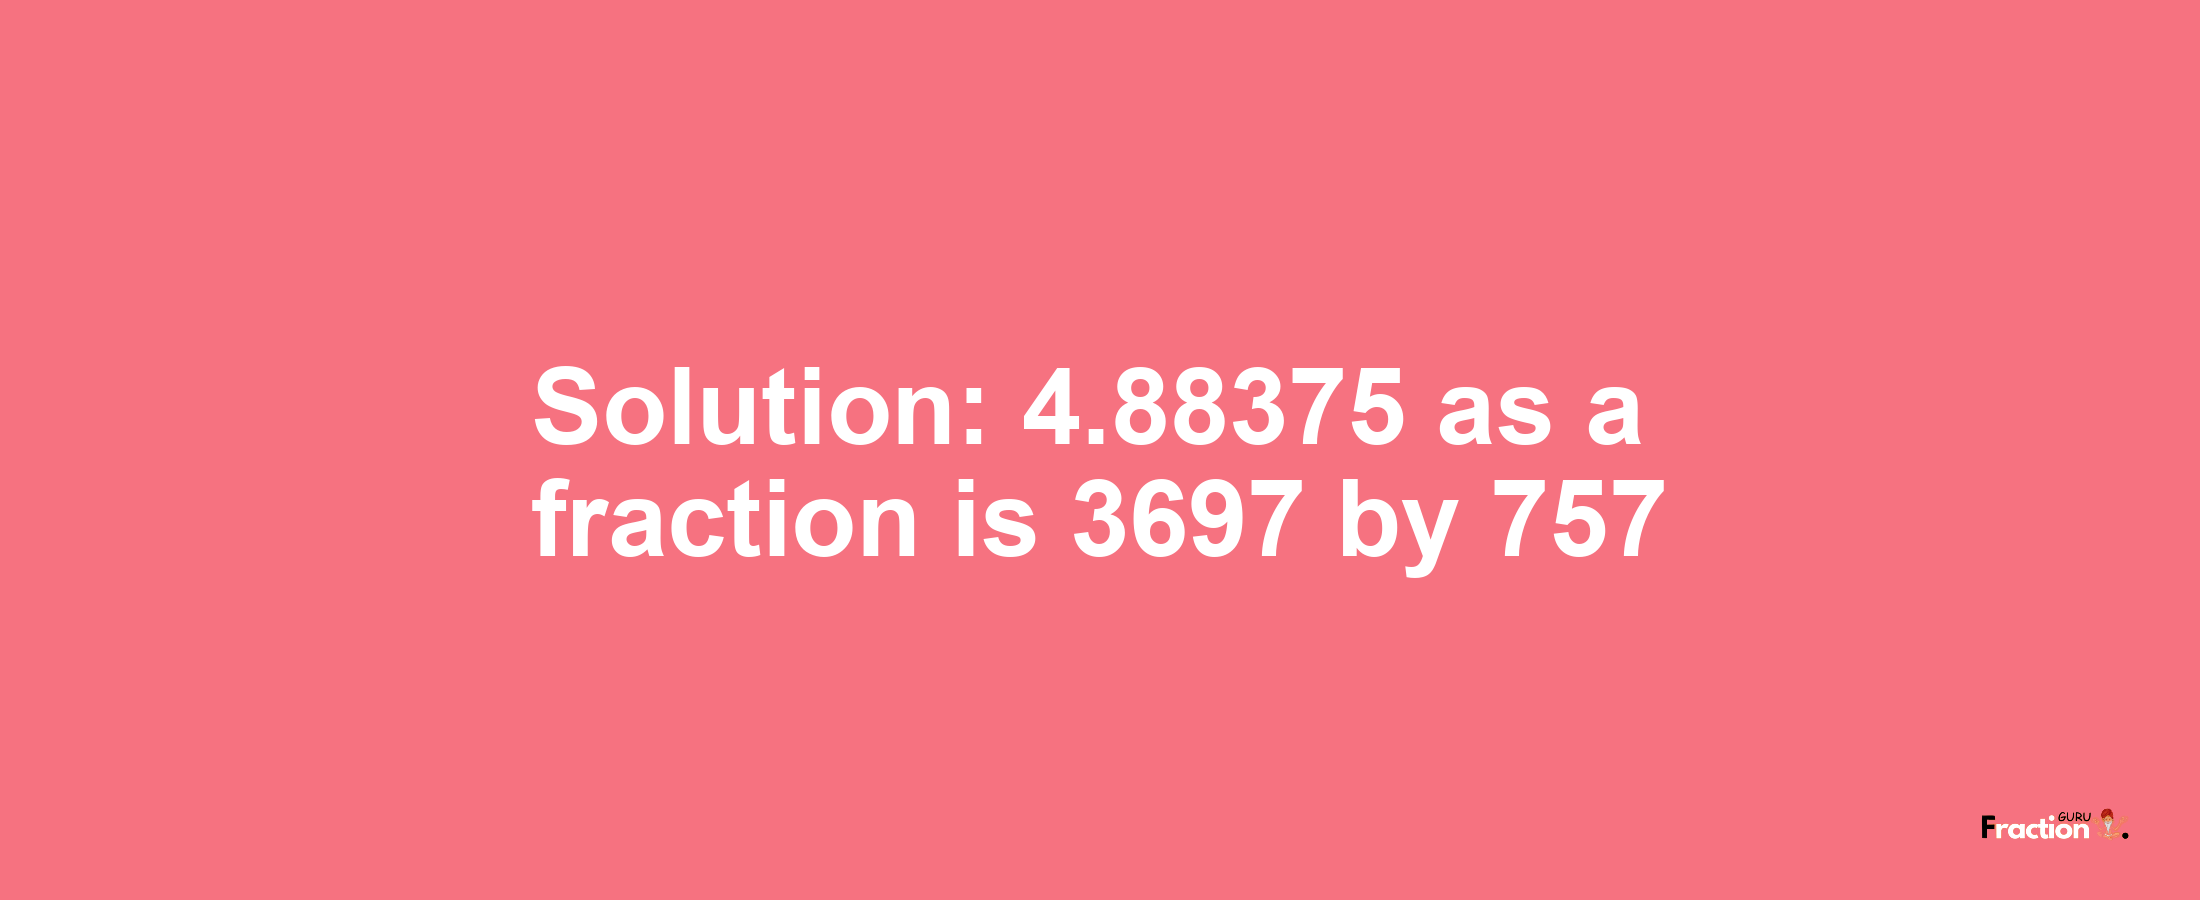 Solution:4.88375 as a fraction is 3697/757